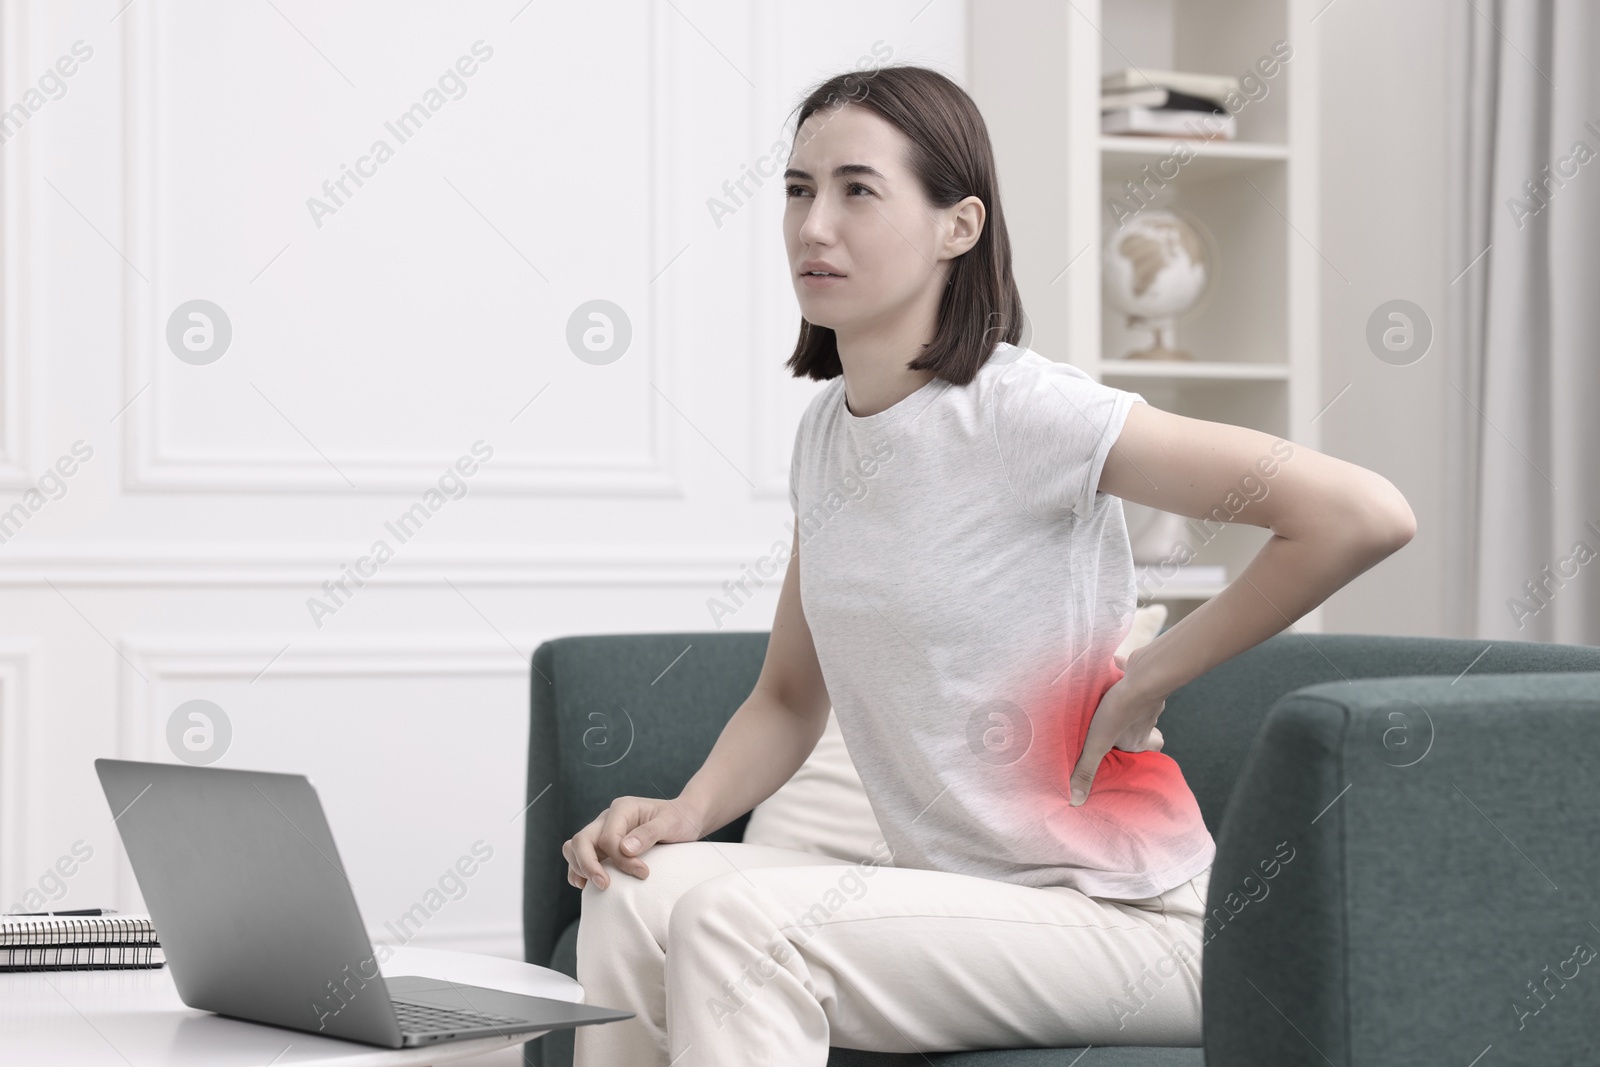 Image of Woman suffering from backache due to poor posture and uncomfortable workplace